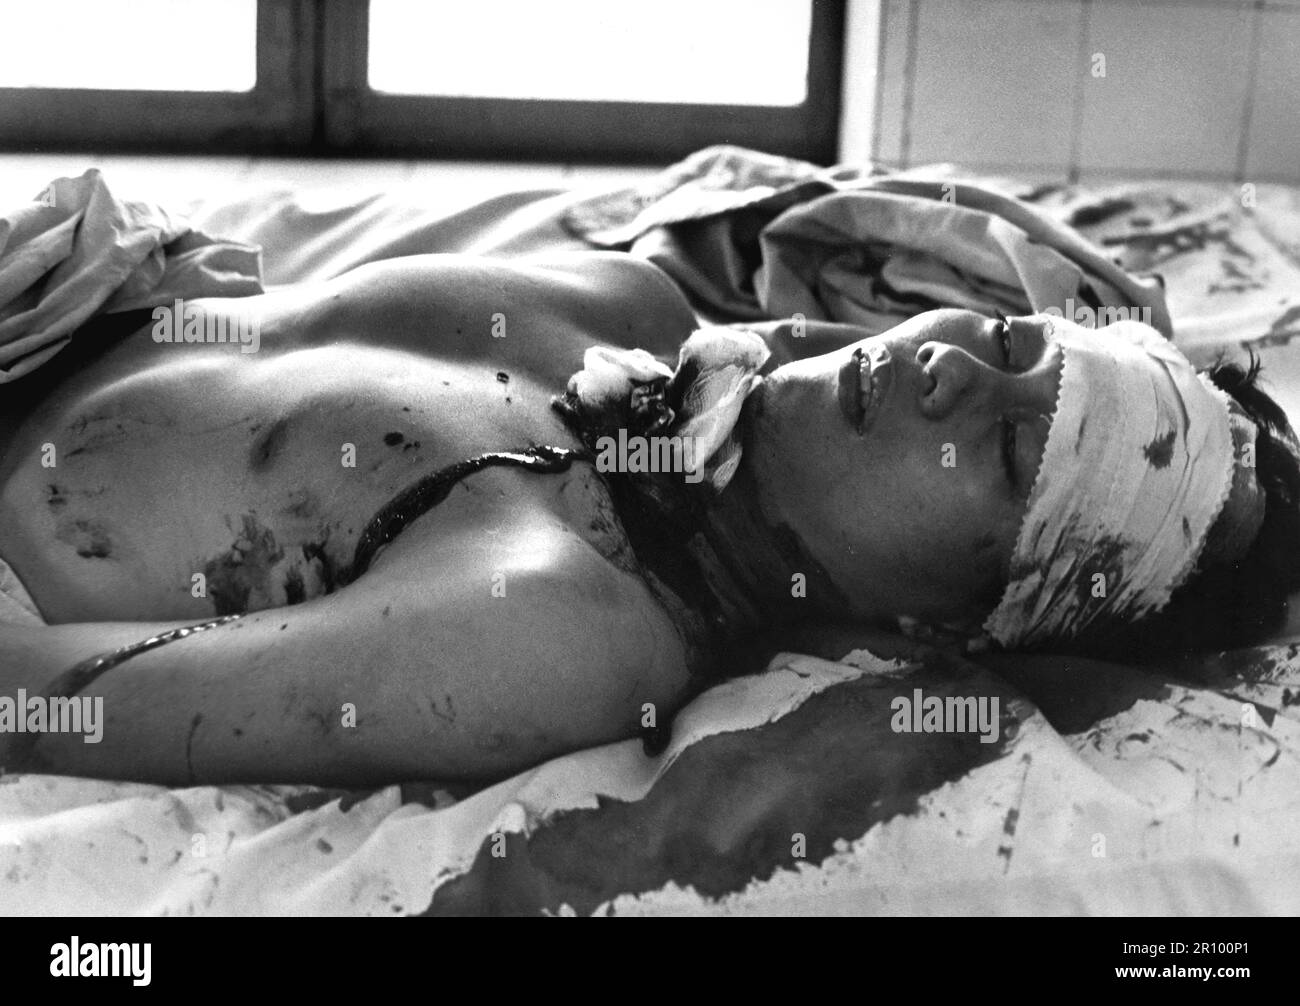 One of 48 persons wounded by a Viet Cong explosion which killed 14 persons in Saigon awaits treatment in the Cong Hoa Hospital. The blast was set off on a busy street corner and the victims included women and children.  February 1966. Stock Photo